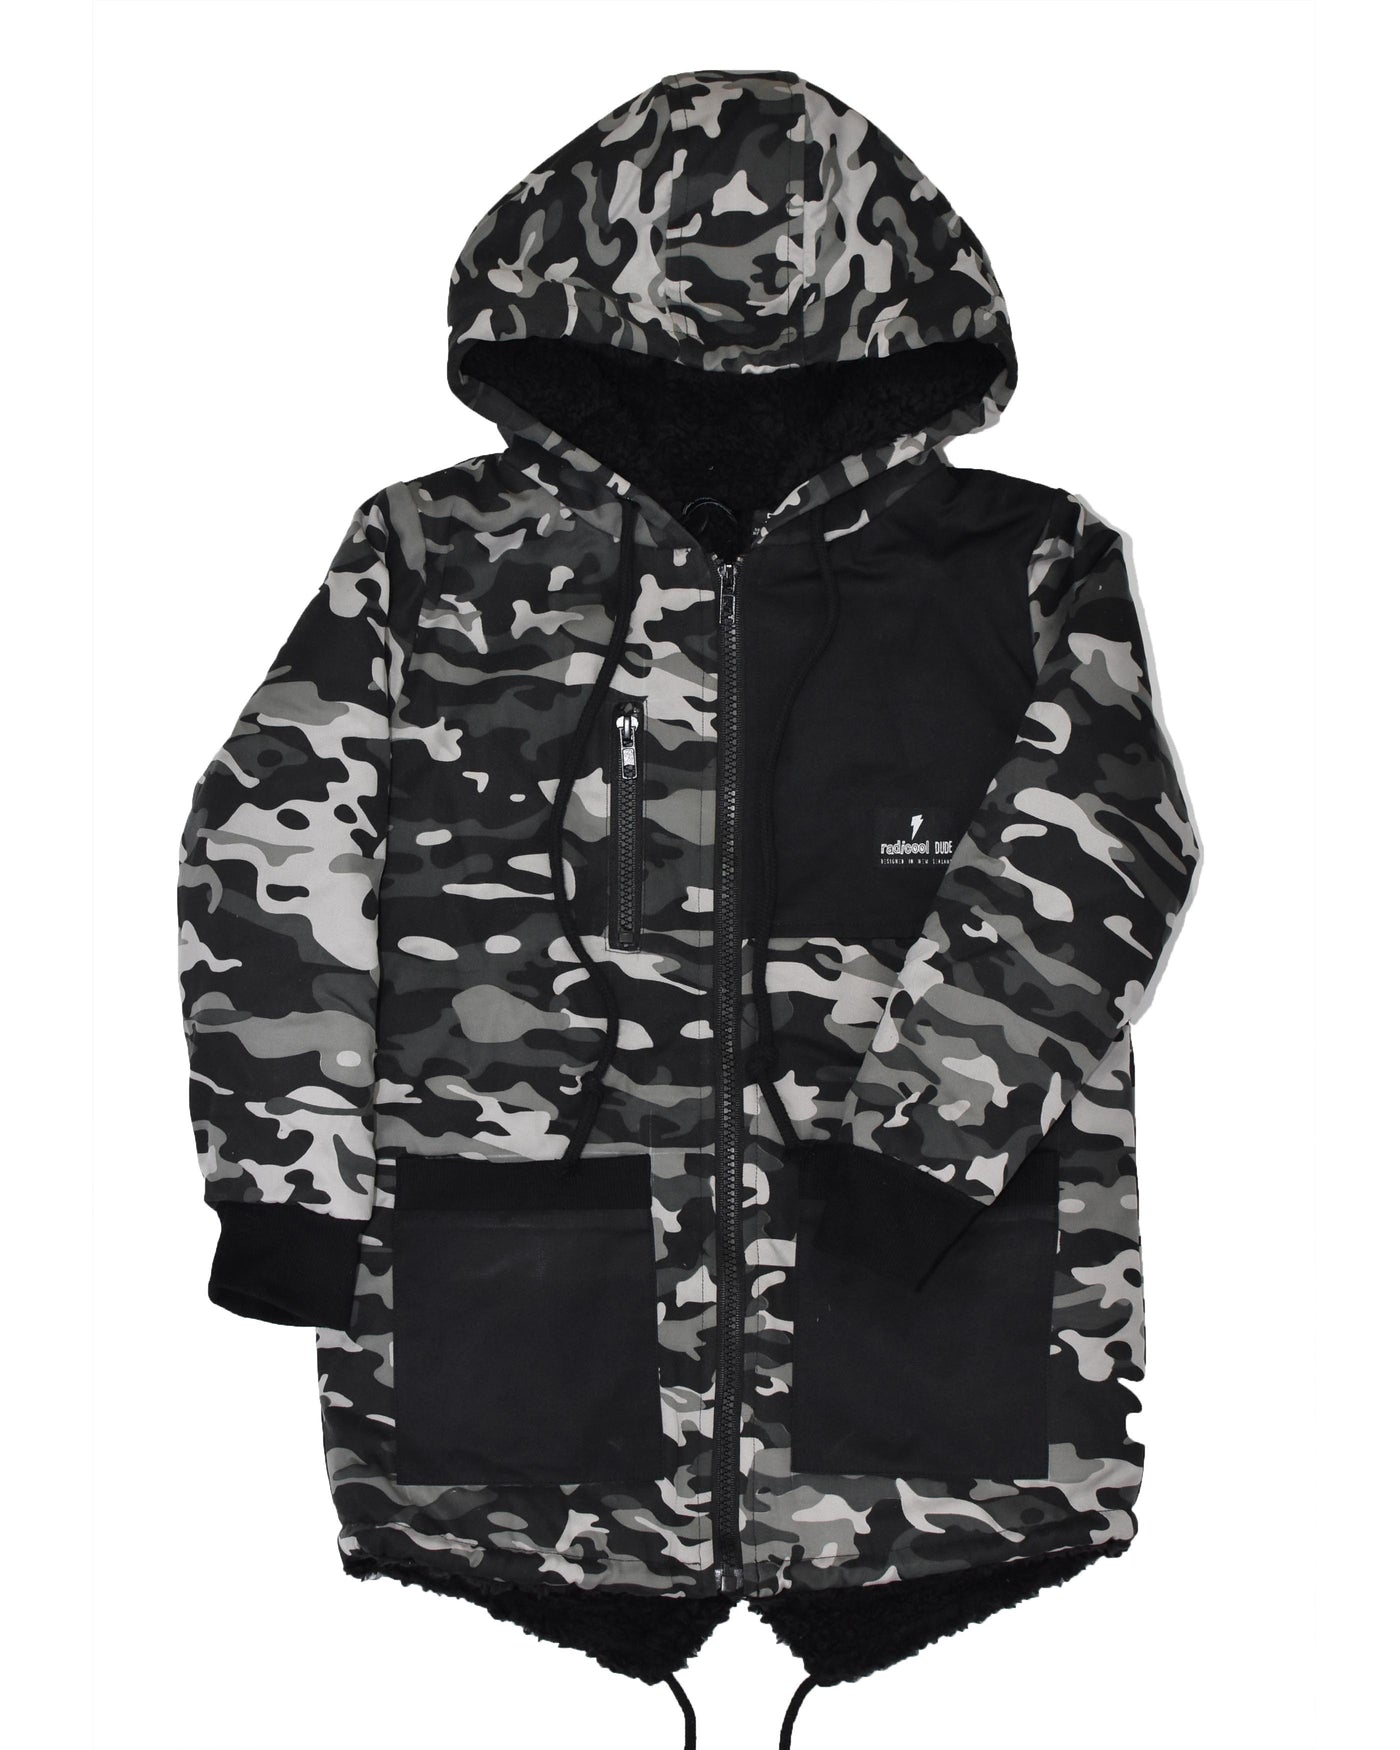 RD1113 STORM JACKET in CAMO NIGHTS